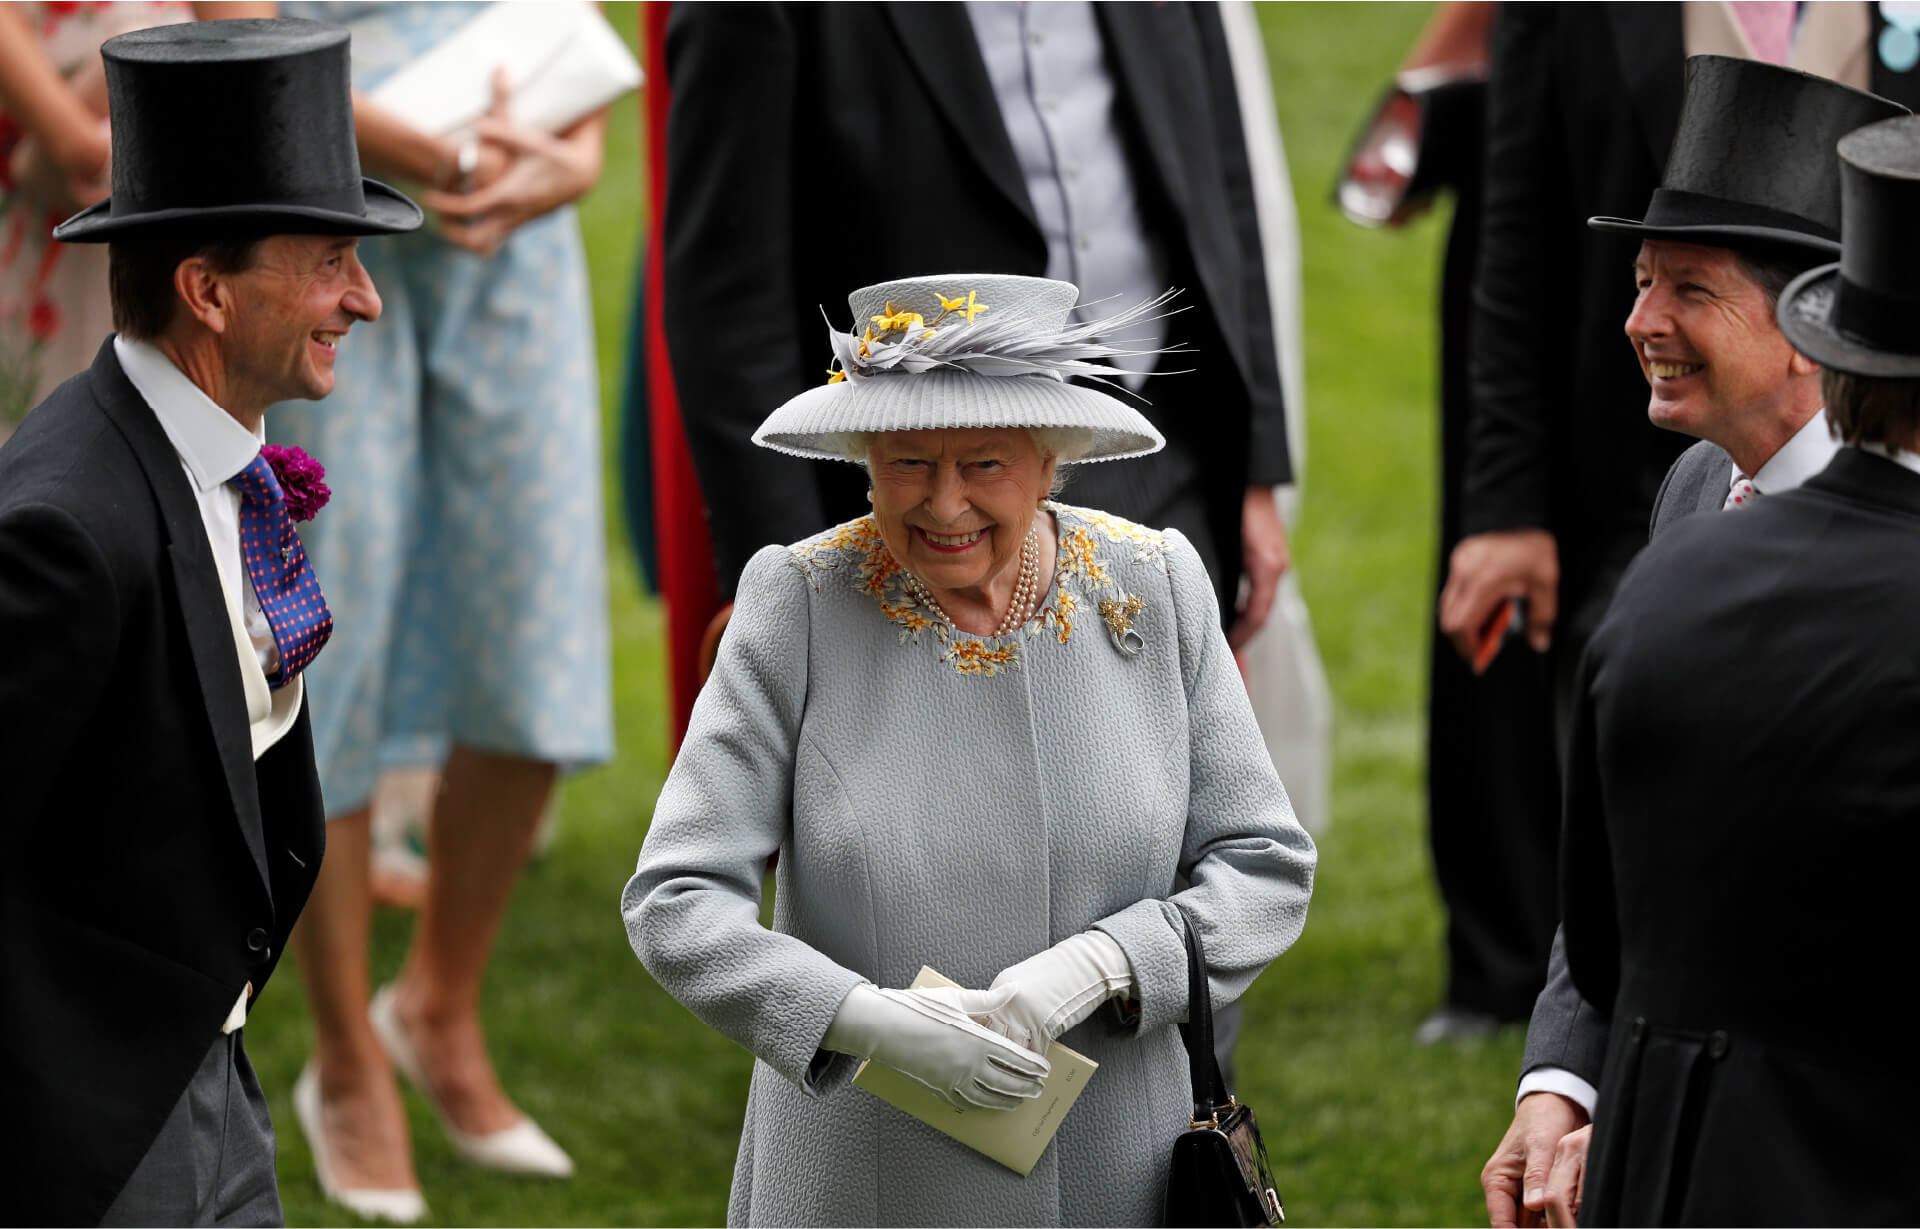 Queen Elizabeth is wearing a gray coat embroidered with yellow flowers around the collar, with a matching medium brimmed gray hat adorned with feathers and yellow flowers.  She is surrounded by men in black hats and tails.